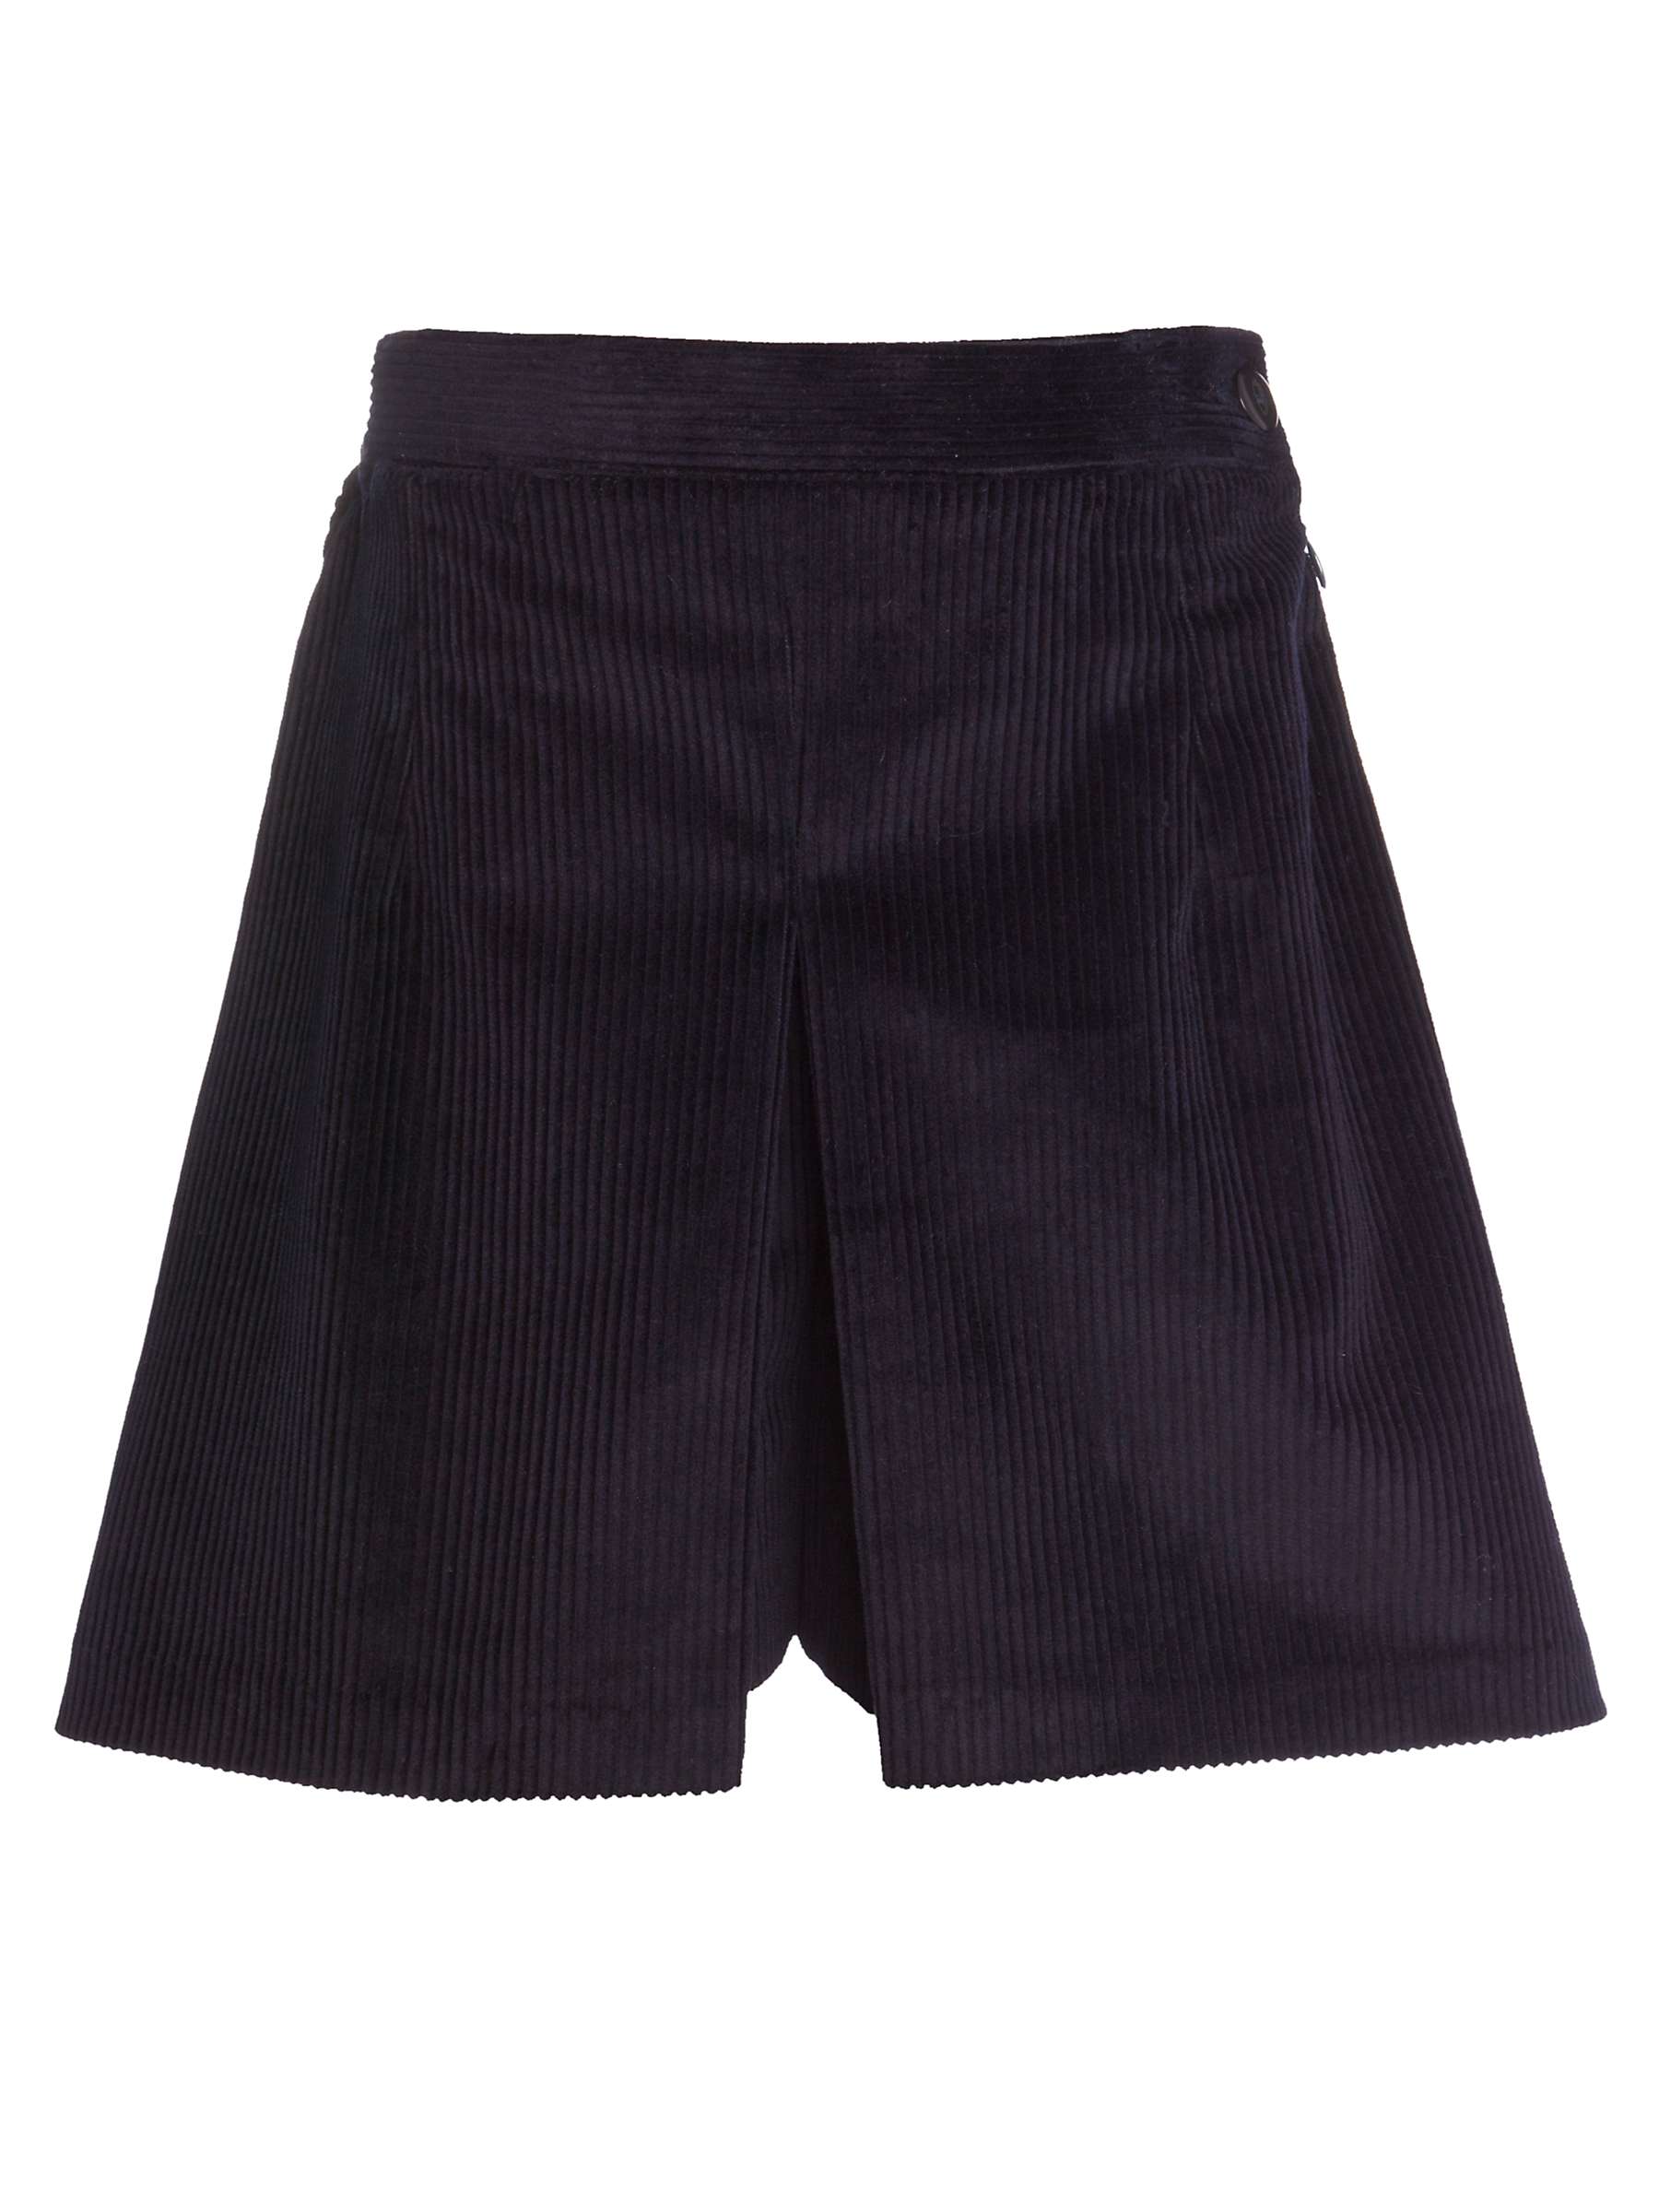 Buy School Girls' Cord Culottes, Navy Online at johnlewis.com